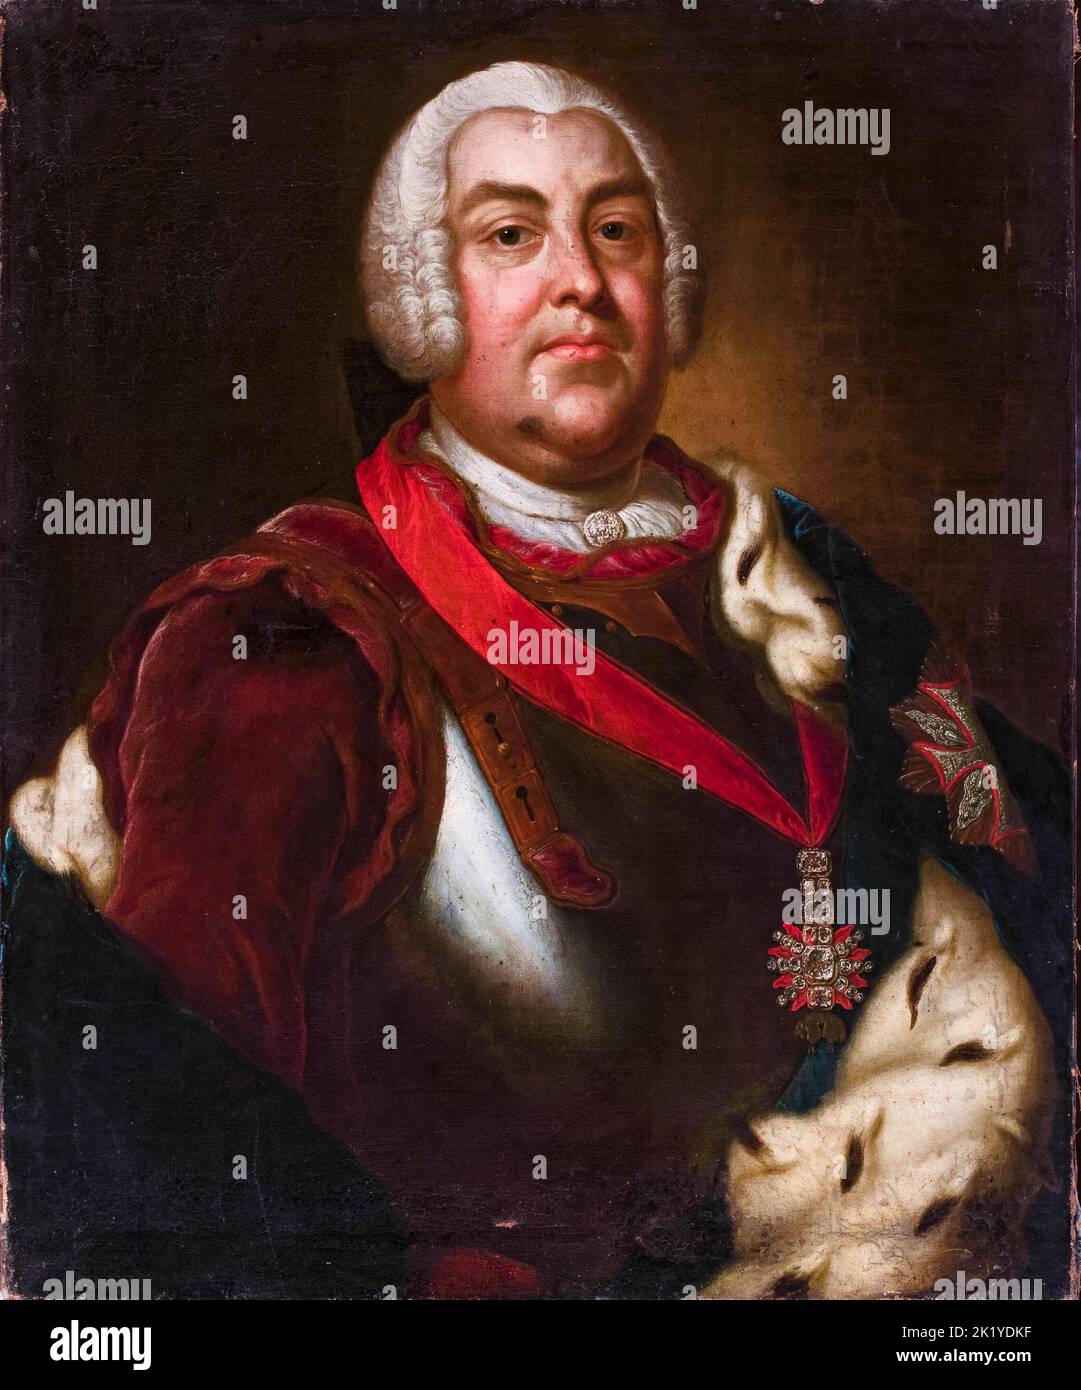 Augustus III (1696-1763), King of Poland, Grand Duke of Lithuania (1733-1763), Elector of Saxony in the Holy Roman Empire (known as Frederick Augustus II), portrait painting in oil on canvas by Christian Benjamin Müller, 1748 Stock Photo